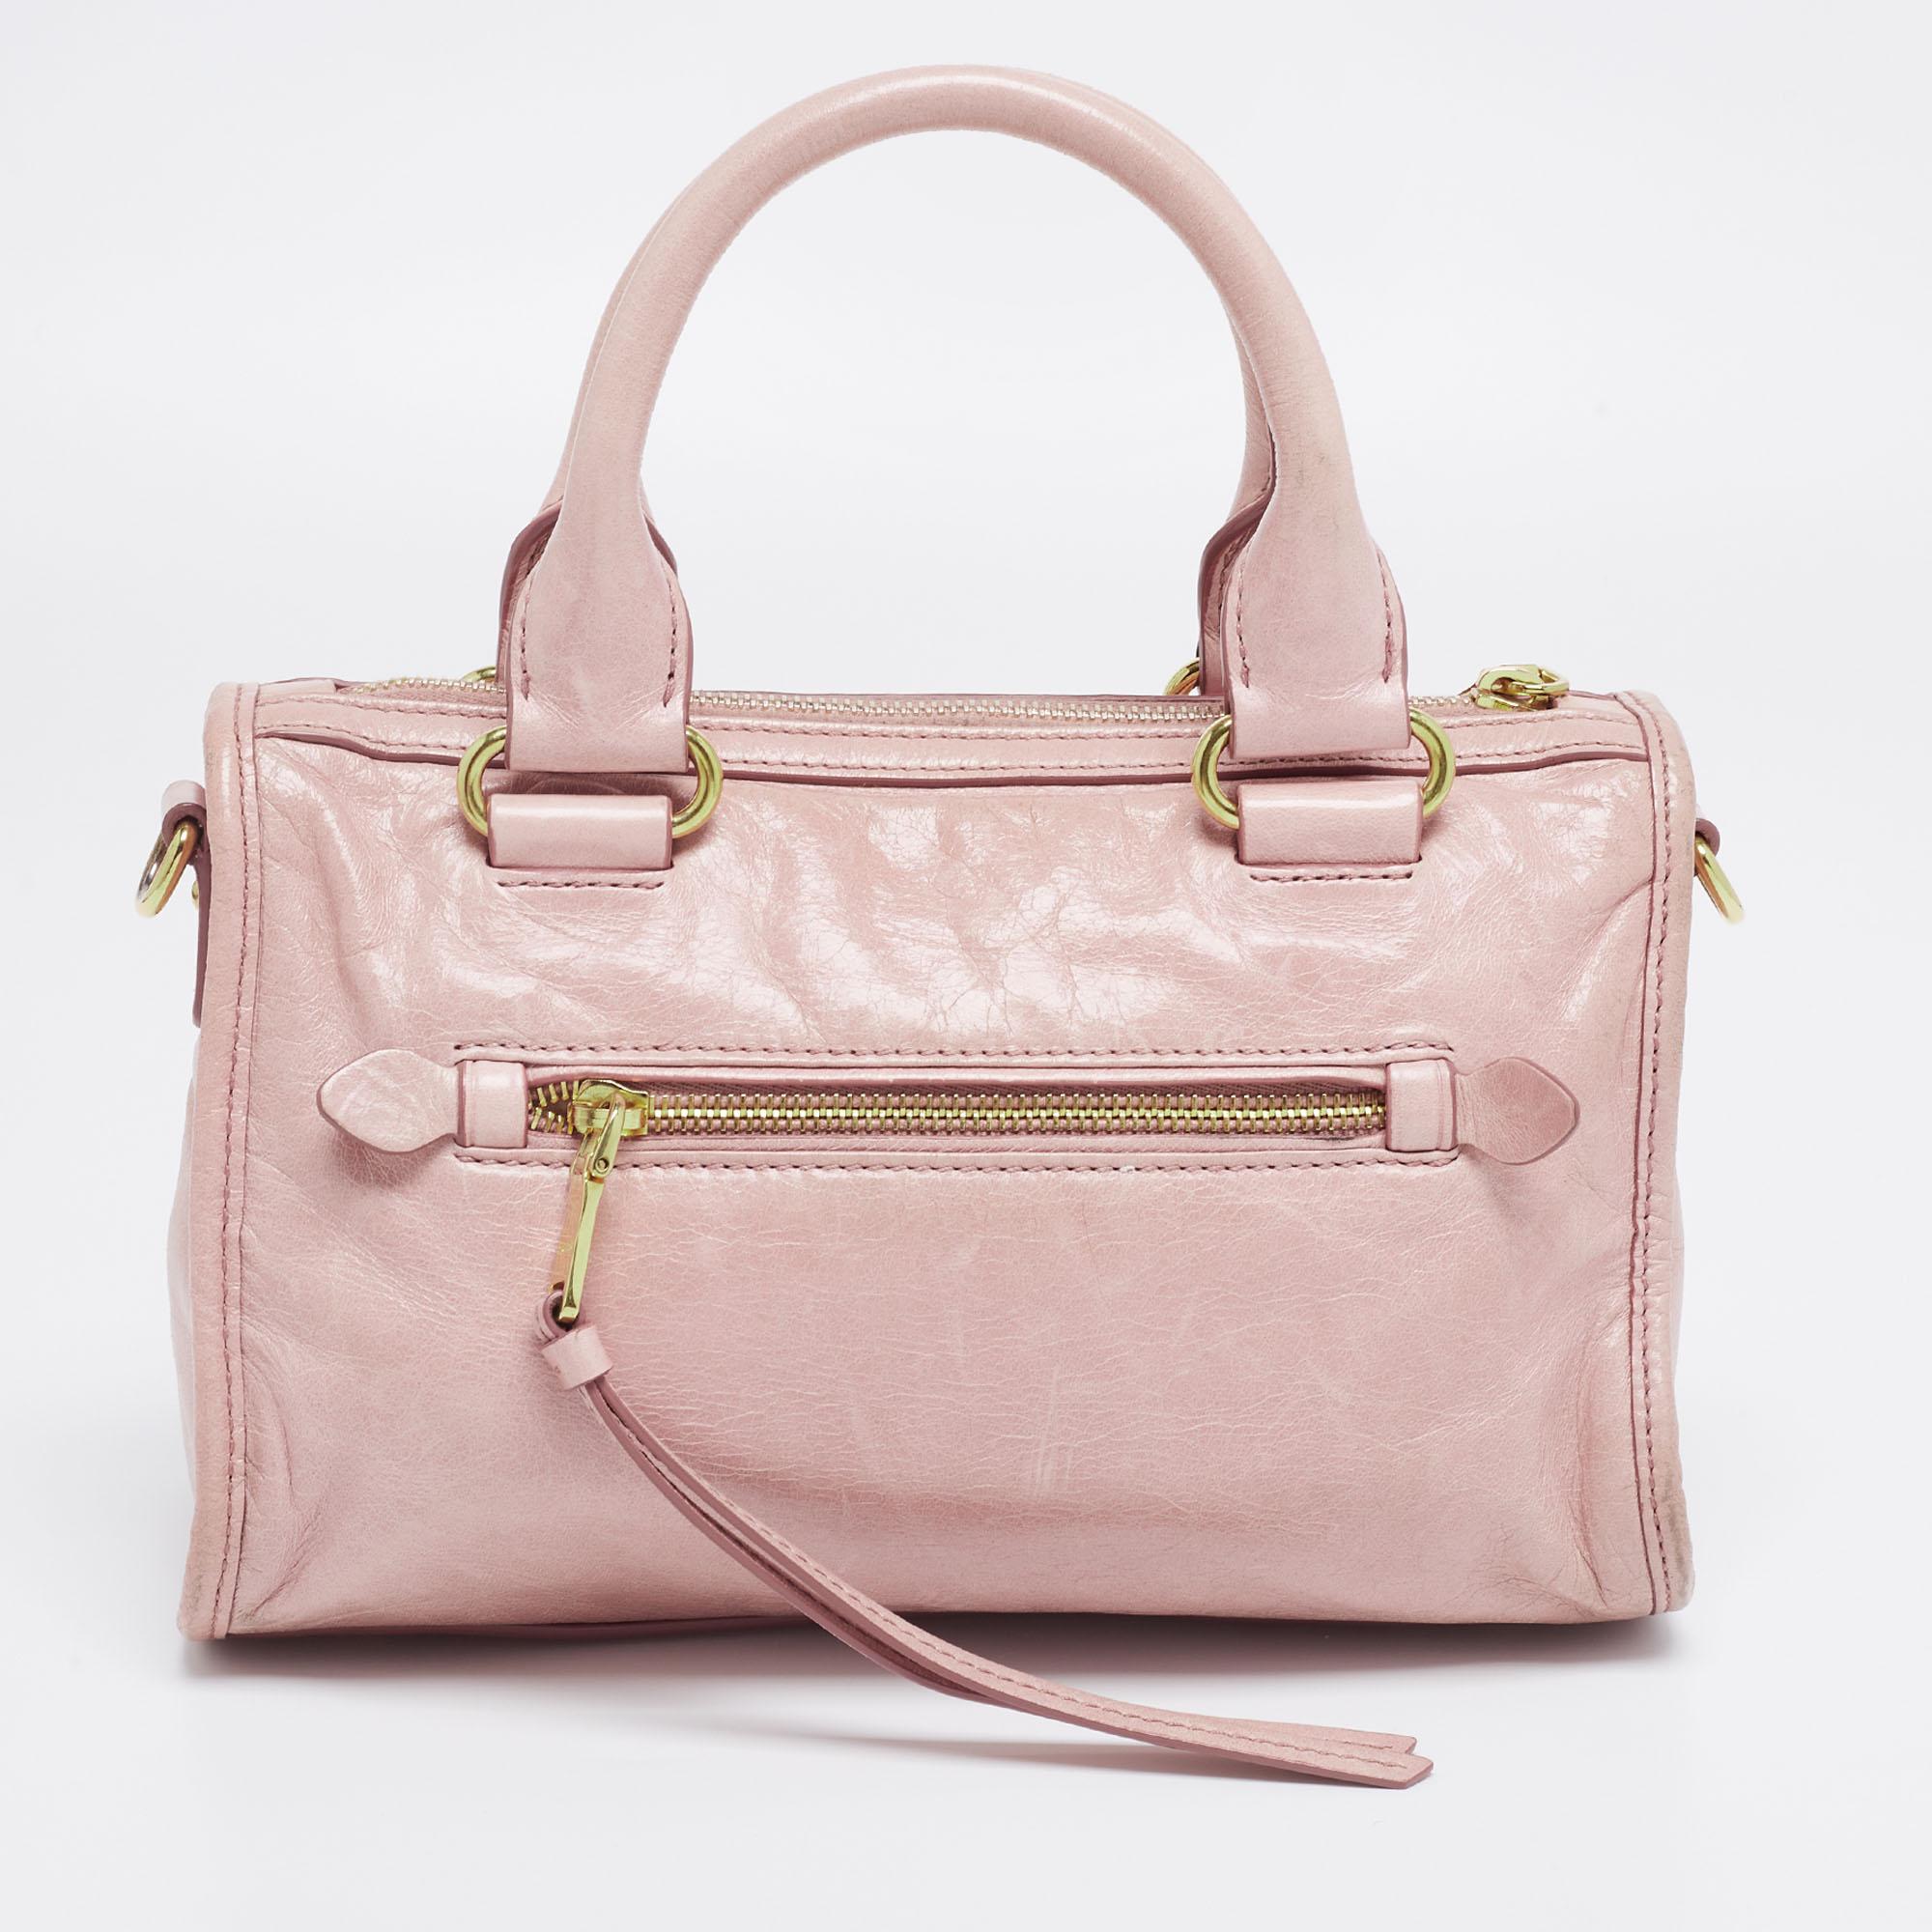 This satchel by Miu Miu is adorned in beautiful color that adds to its versatility. Accented with pretty details and polished hardware, this bag will effortlessly adapt to a myriad of ensembles.

Includes: Detachable Strap